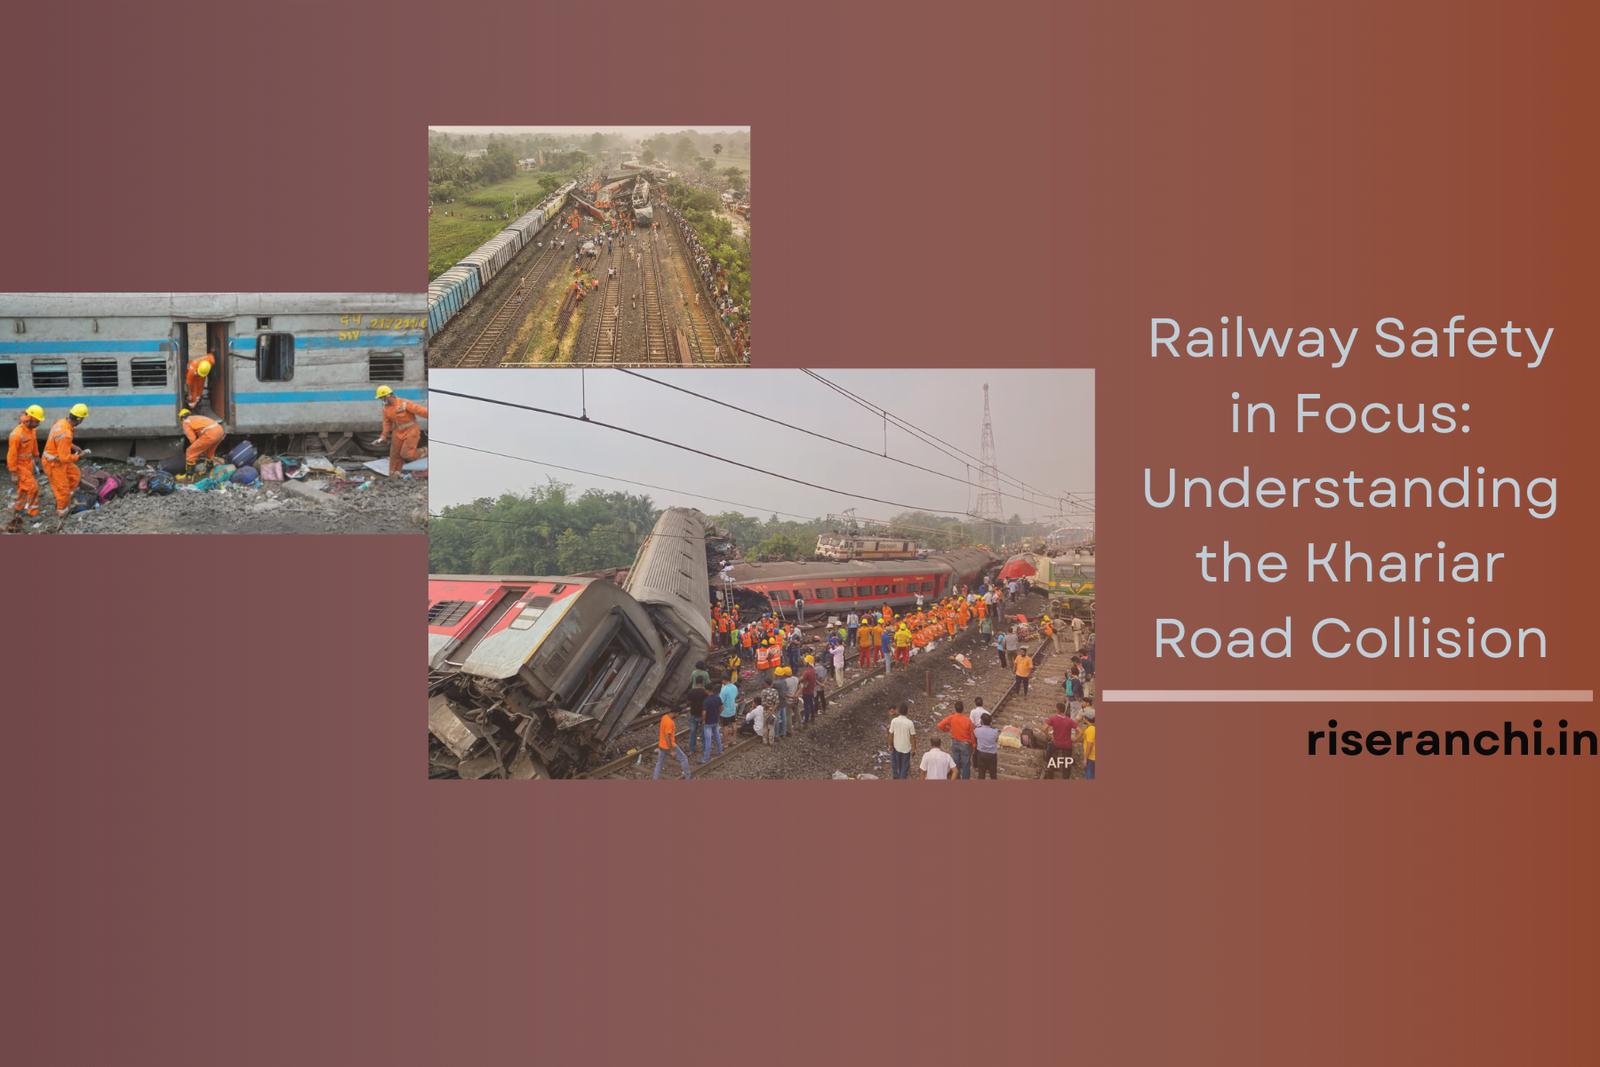 CRS Report on Khariar Road Train Accident: Recommendations for Safer Railways